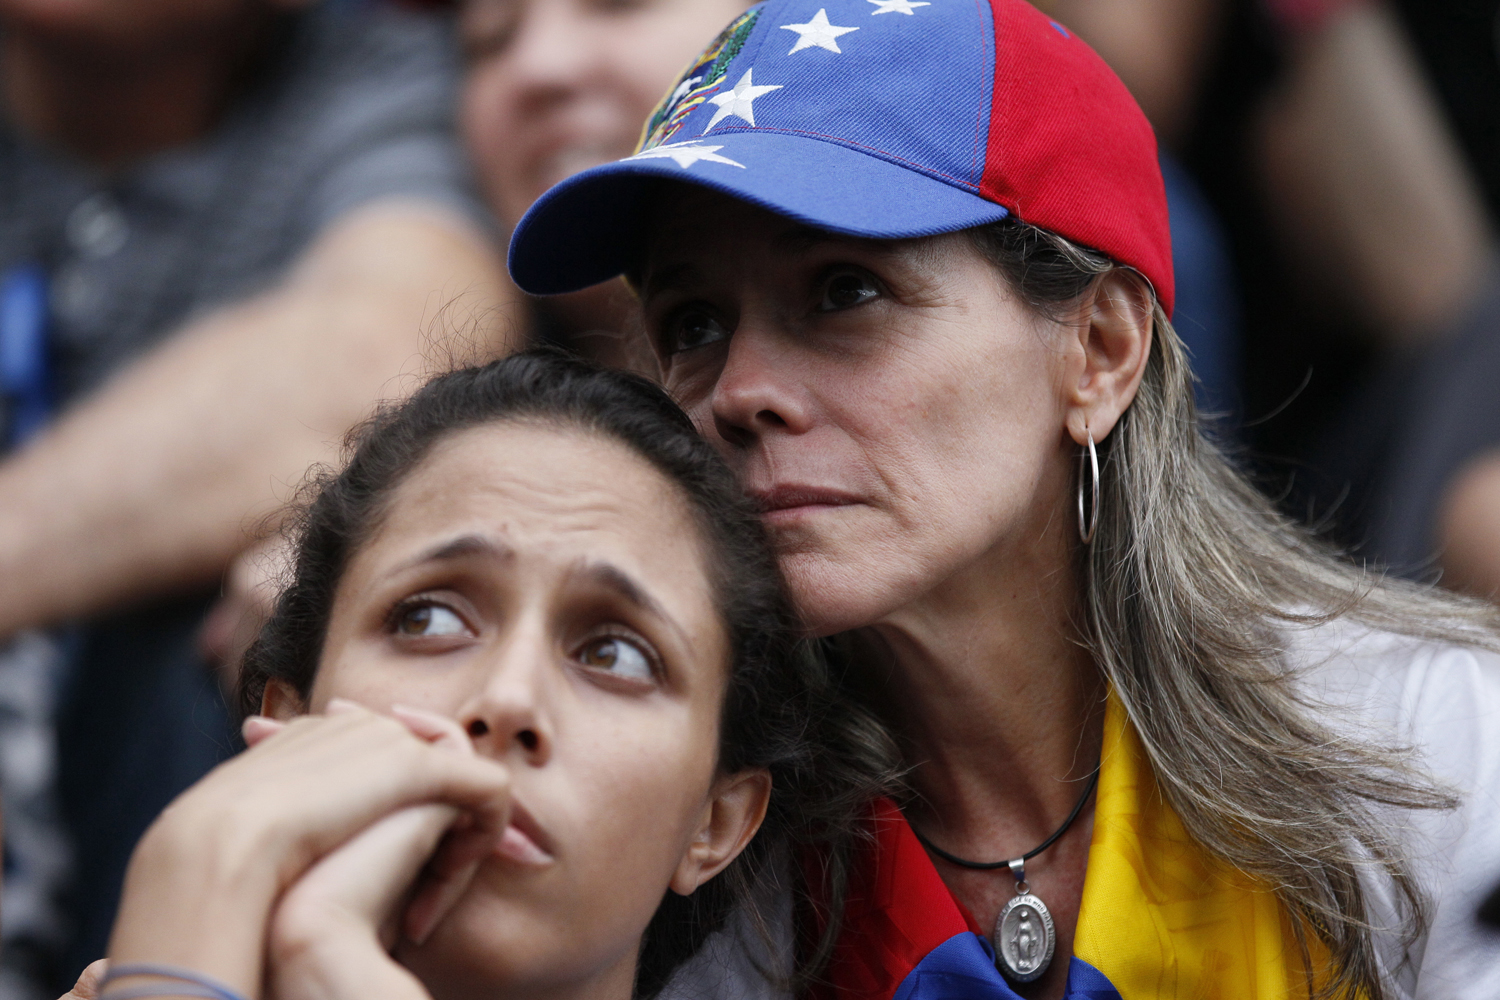 Anti-government demonstrators attend a vigil in honor of those who have been killed during clashes between security forces and demonstrators in Caracas, Venezuela, Monday, July 31, 2017. (Ariana Cubillos/AP)